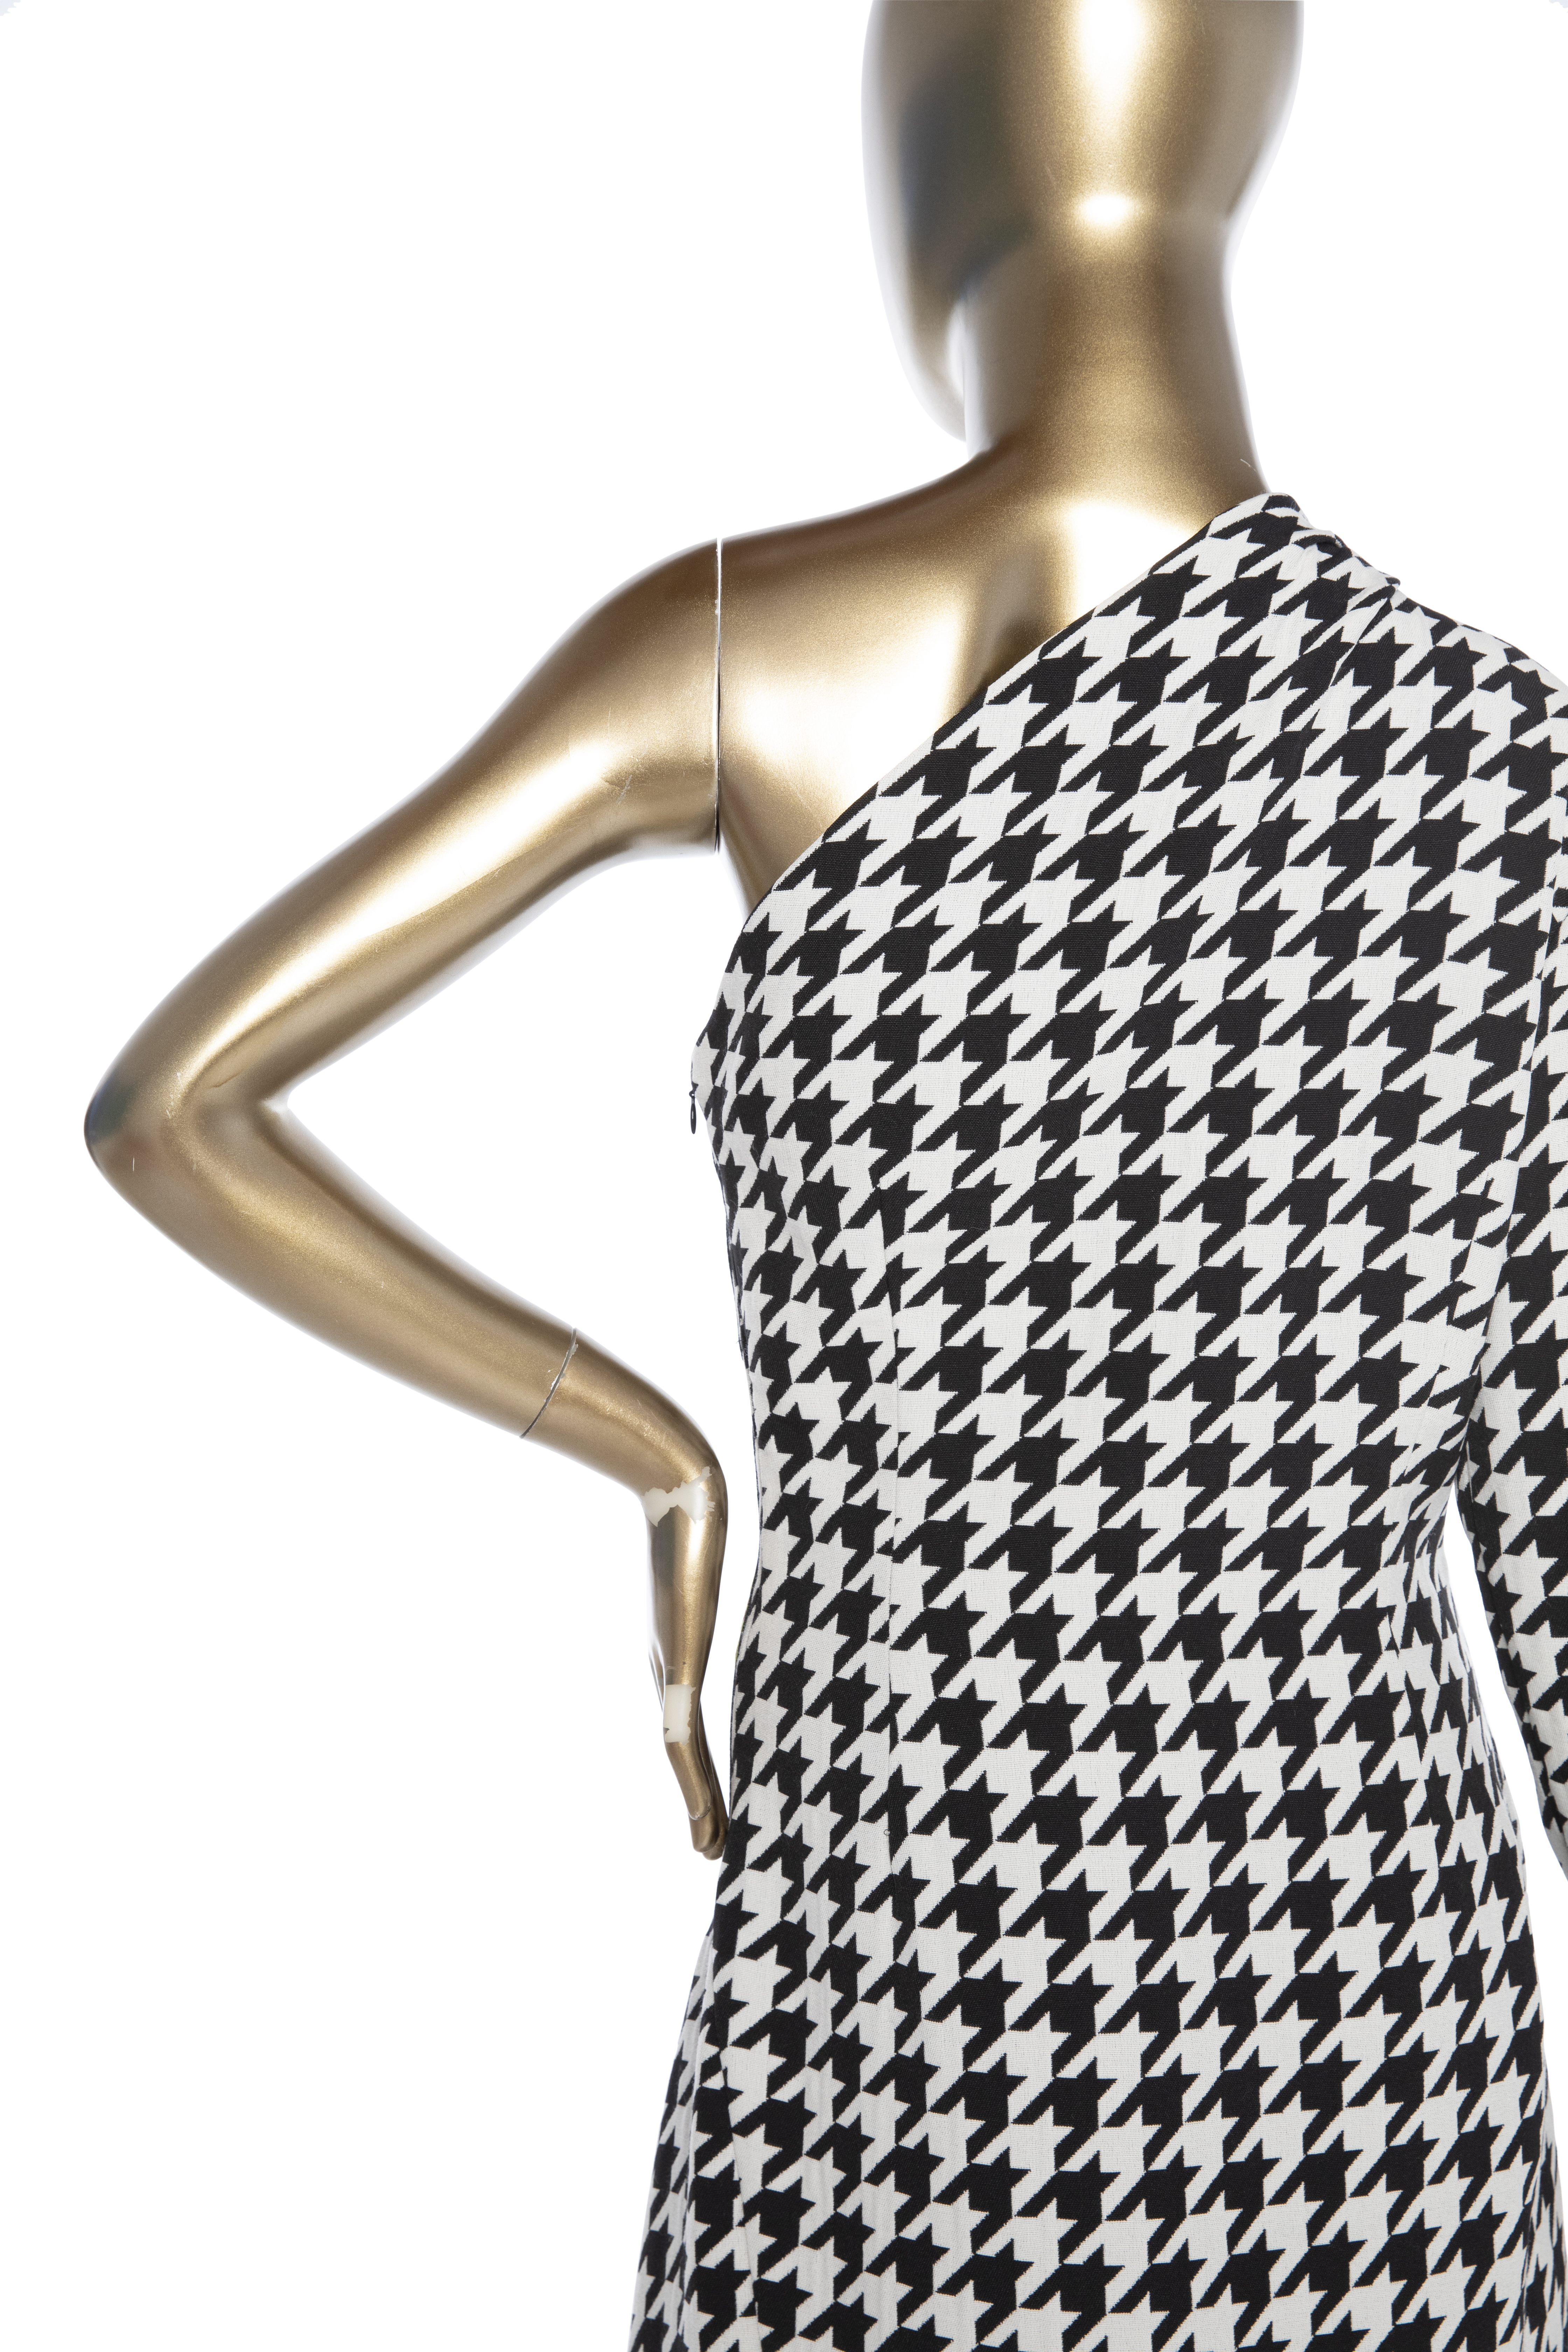 Off-White // Pre-Fall 2018 Black & White Multi Houndstooth One Shoulder  Dress – VSP Consignment